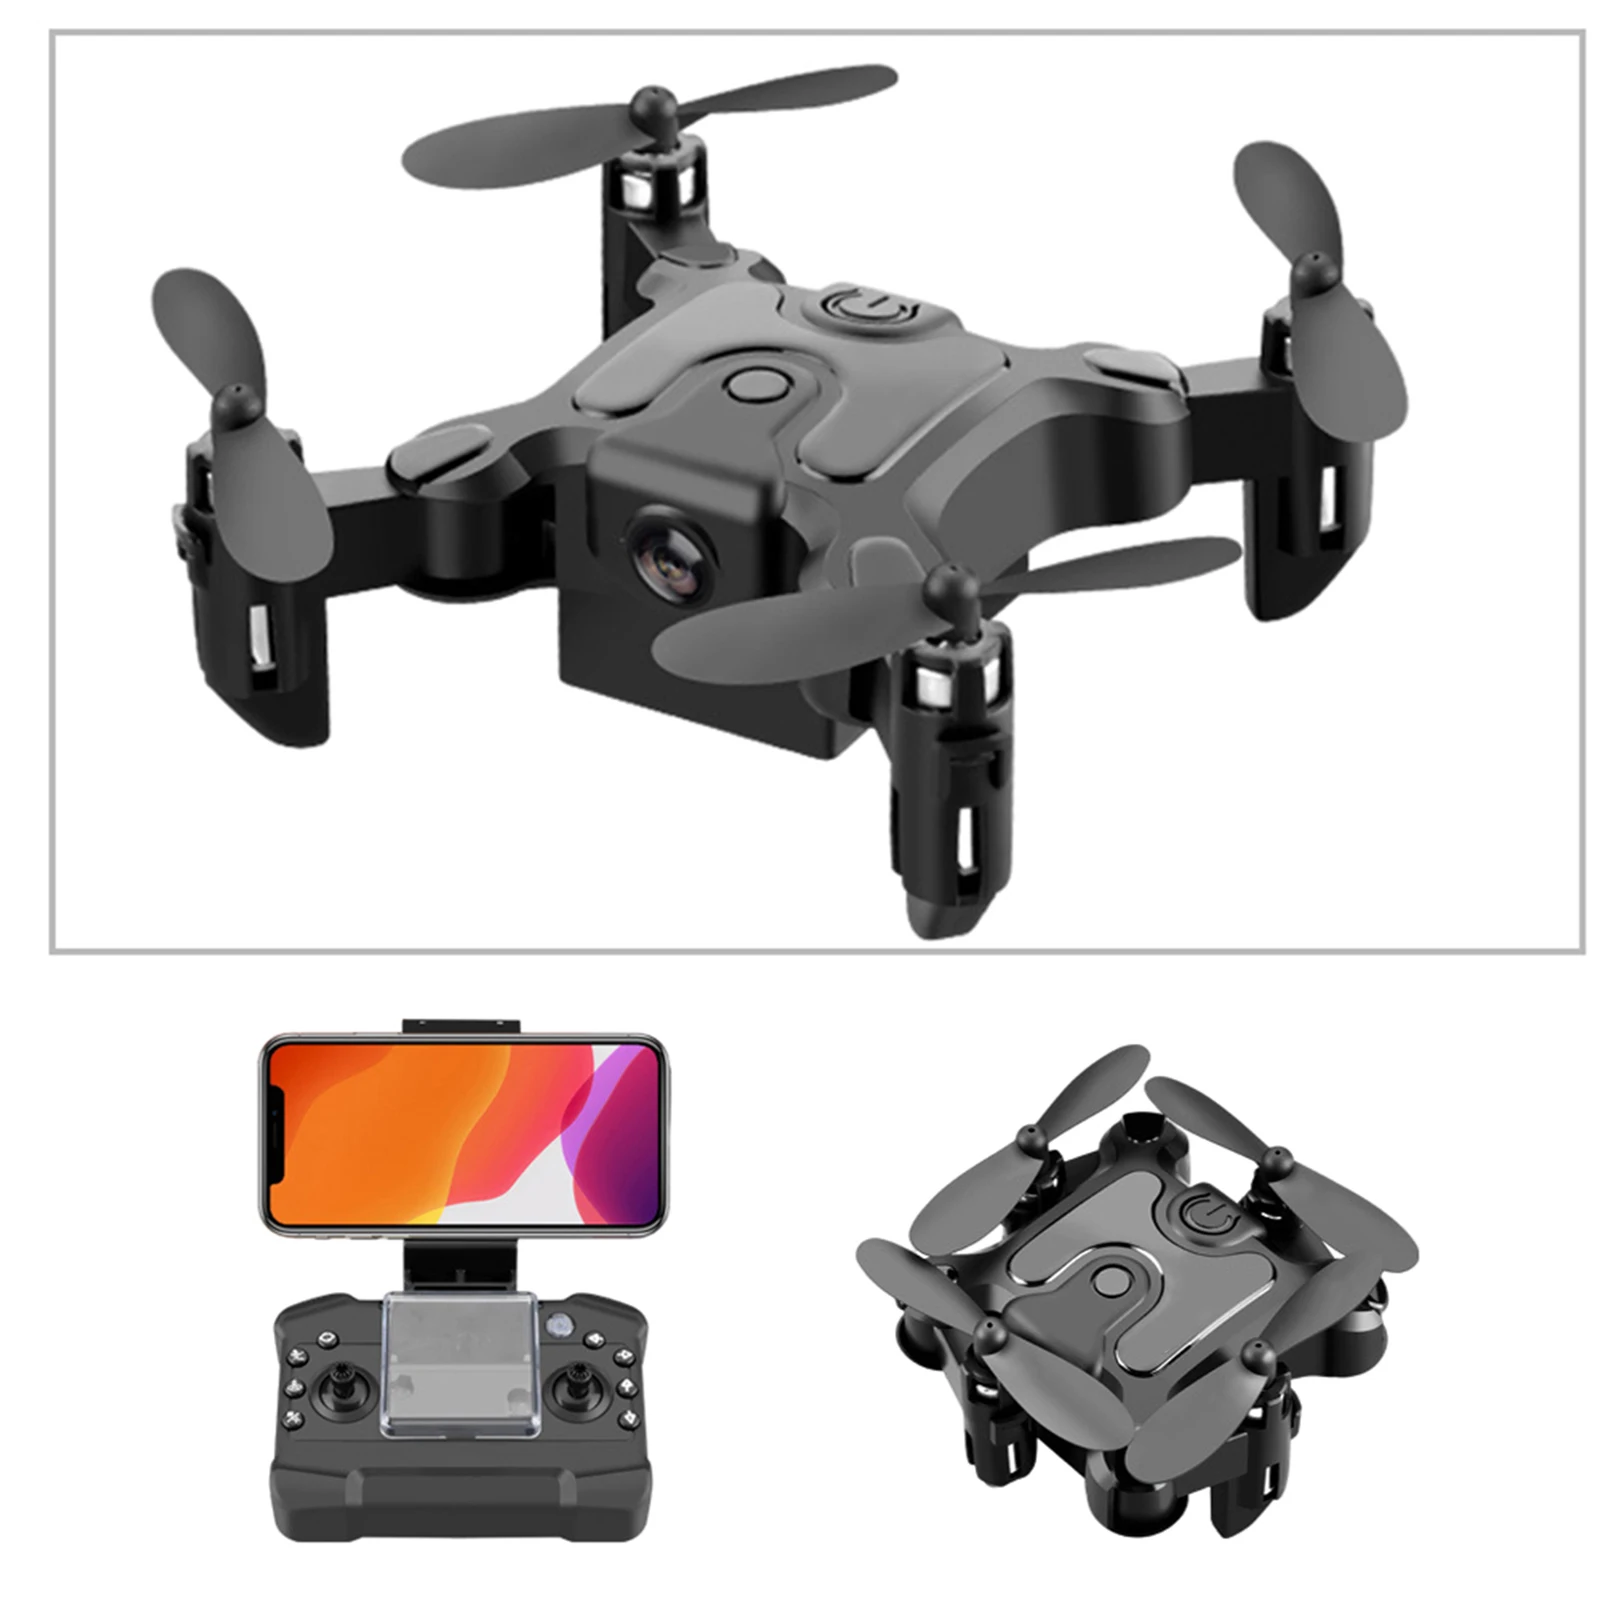 6-Axis 4CH RC Drone 2.4G Live Video Altitude Hold Radio Control Quadcopter